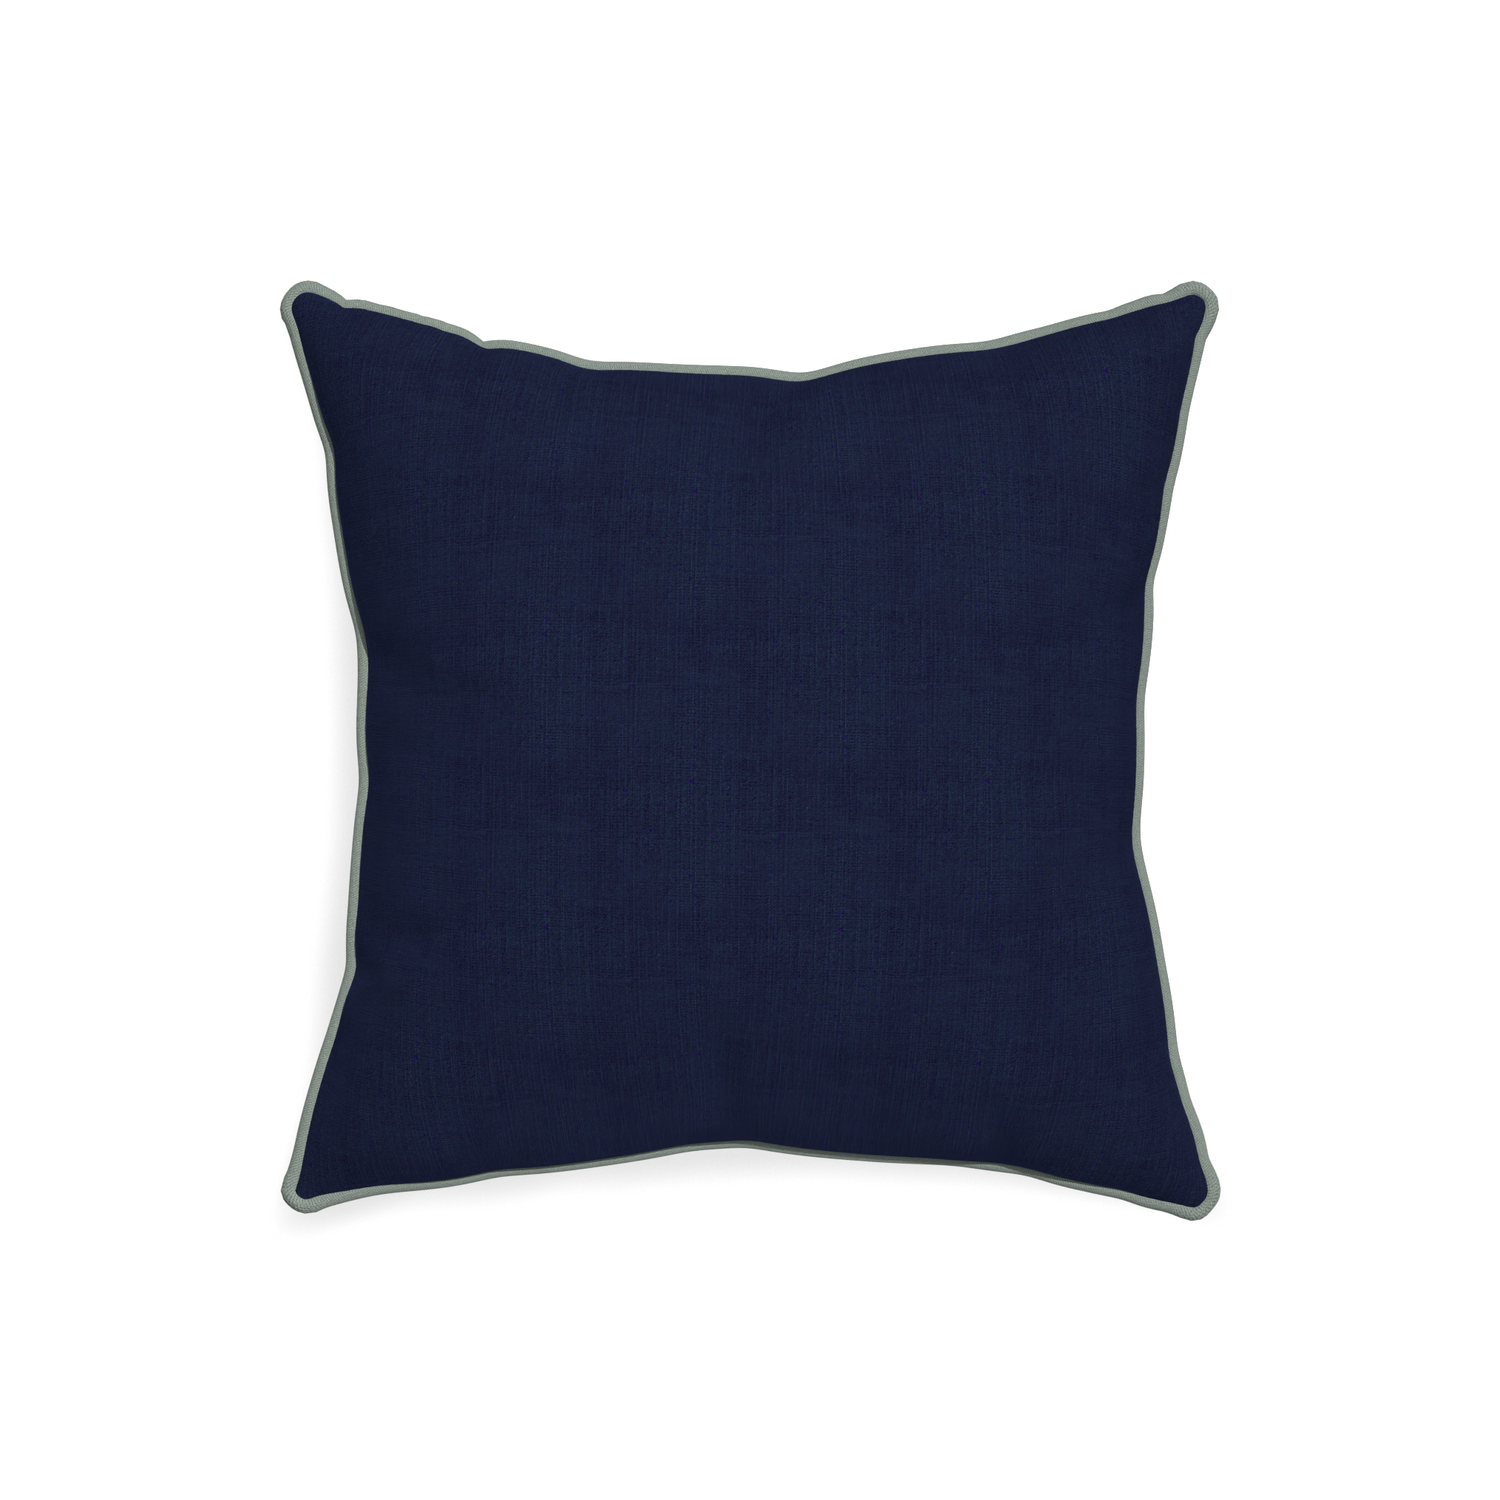 20-square midnight custom navy bluepillow with sage piping on white background